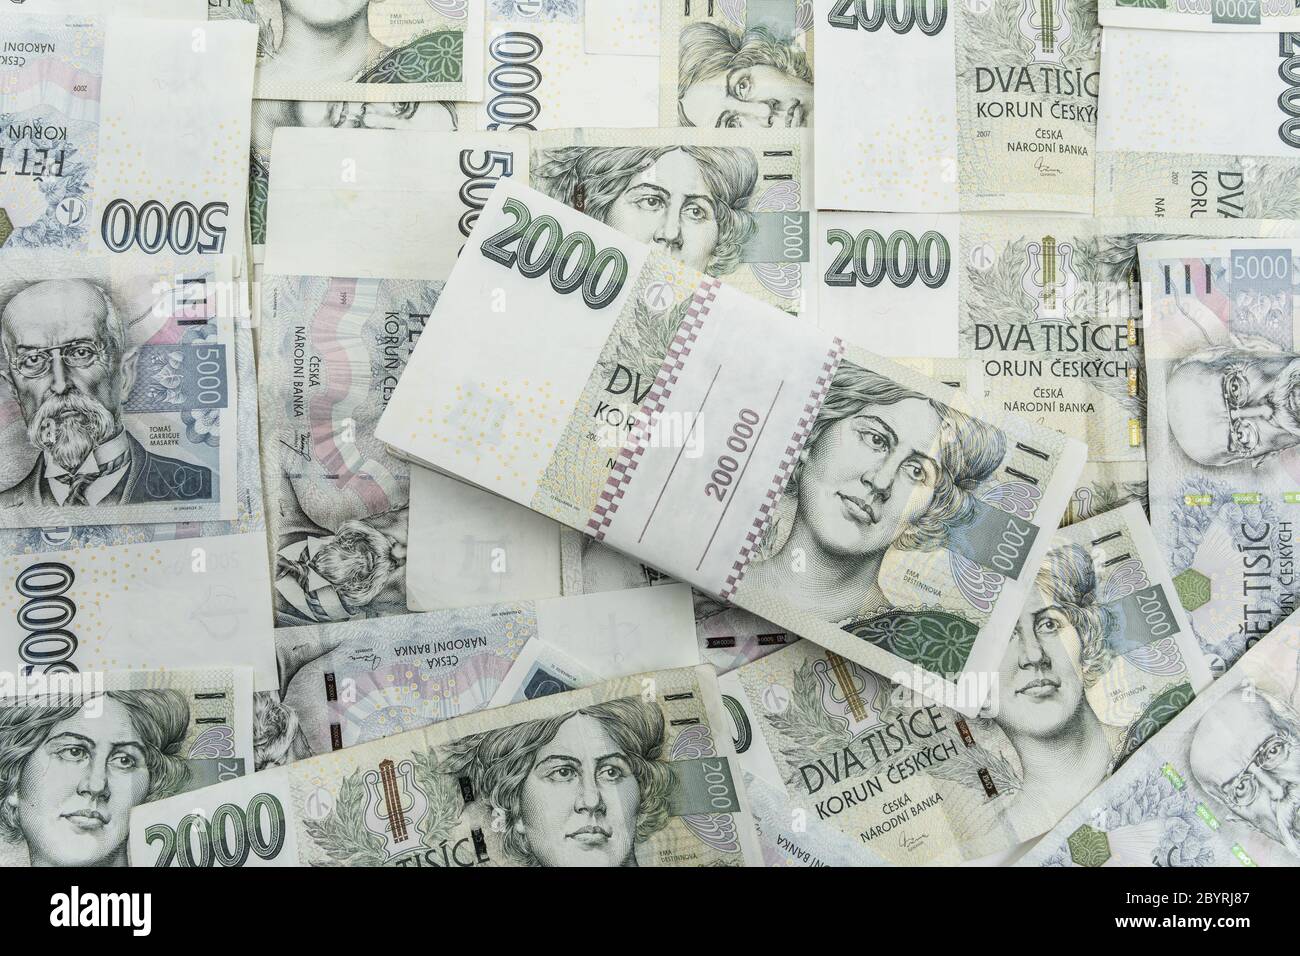 czech banknotes thousands crowns. corona virus pandemic financial crisis and economy restart concept Stock Photo